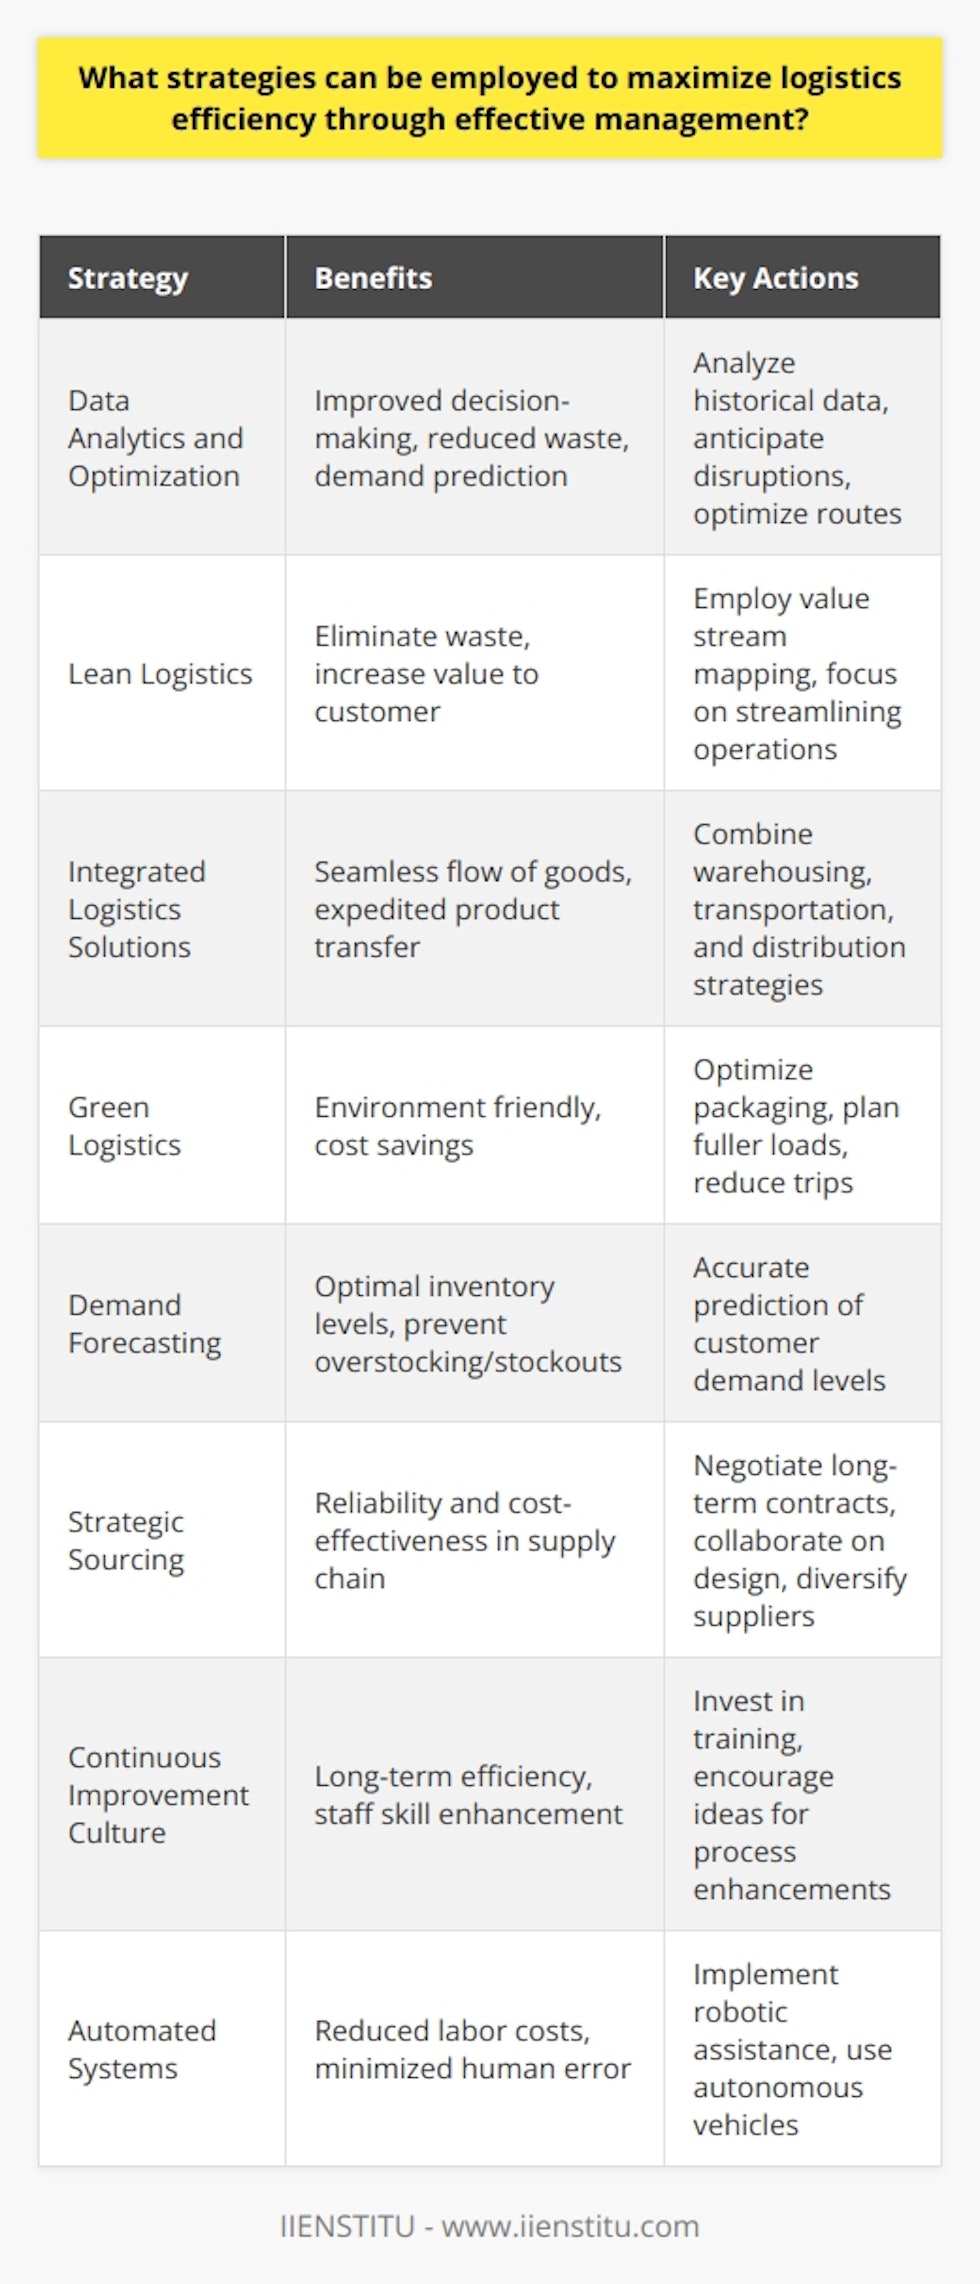 In the contemporary business environment, streamlining logistics operations is imperative for enhancing efficiency, reducing costs, and maintaining a competitive edge. Here are several strategies that companies can employ to fortify their logistics processes through astute management:1. **Data Analytics and Optimization**: Harnessing the power of data analytics can significantly improve decision-making and predictability in logistics. By analyzing historical shipping data, weather trends, and traffic patterns, companies can anticipate potential disruptions and optimize routes. Additionally, data analytics enables the prediction of demand, which can refine inventory levels and reduce waste.2. **Lean Logistics**: Adopting lean principles can be beneficial in identifying and eliminating waste within the logistics chain. Techniques such as value stream mapping can highlight areas of redundancy or delay, allowing for more streamlined operations that focus on adding value to the customer.3. **Integrated Logistics Solutions**: Creating an integrated system that combines warehousing, transportation, and distribution can foster a more seamless flow of goods. This could involve cross-docking practices that expedite the transfer of products from inbound to outbound transportation modes, minimizing storage time and speeding up delivery.4. **Green Logistics**: Implementing sustainable practices not only helps the environment but can also lead to cost savings. For instance, optimizing packaging to reduce material waste or planning fuller loads to decrease the number of trips required can both reduce carbon emissions and save money.5. **Demand Forecasting**: Accurate demand forecasting helps in maintaining optimal inventory levels. It prevents both overstocking, which can lead to increased holding costs, and stockouts, which can result in lost sales and customer dissatisfaction.6. **Strategic Sourcing**: Building strategic relationships with suppliers can ensure reliability and cost-effectiveness in the supply chain. This may include negotiating long-term contracts, collaborating on design and production for efficiency, and diversifying the supplier base to mitigate risks.7. **Continuous Improvement Culture**: Fostering an organizational culture that continually seeks to improve can drive efficiency in the long term. Investing in training for staff to enhance their skills in logistics management as well as encouraging them to contribute ideas for process enhancements can yield significant dividends in efficiency.8. **Automated Systems**: Implementing advanced automated systems, including robotic picking and sorting or autonomous vehicles for transportation, can cut down on labor costs and human error.Crucially, educational institutions like IIENSTITU provide industry professionals and students with comprehensive training and courses aimed at honing their skills in logistics and supply chain management. Having a highly skilled workforce with up-to-date knowledge and competencies is foundational to applying the strategies mentioned above effectively.While these strategies are not exhaustive, they provide a robust framework for businesses to begin rethinking and rejuvenating their approach to logistics management. Implementing them with diligence and foresight has the potential to significantly enhance logistical operations, ushering in greater efficiency and competitive advantage.